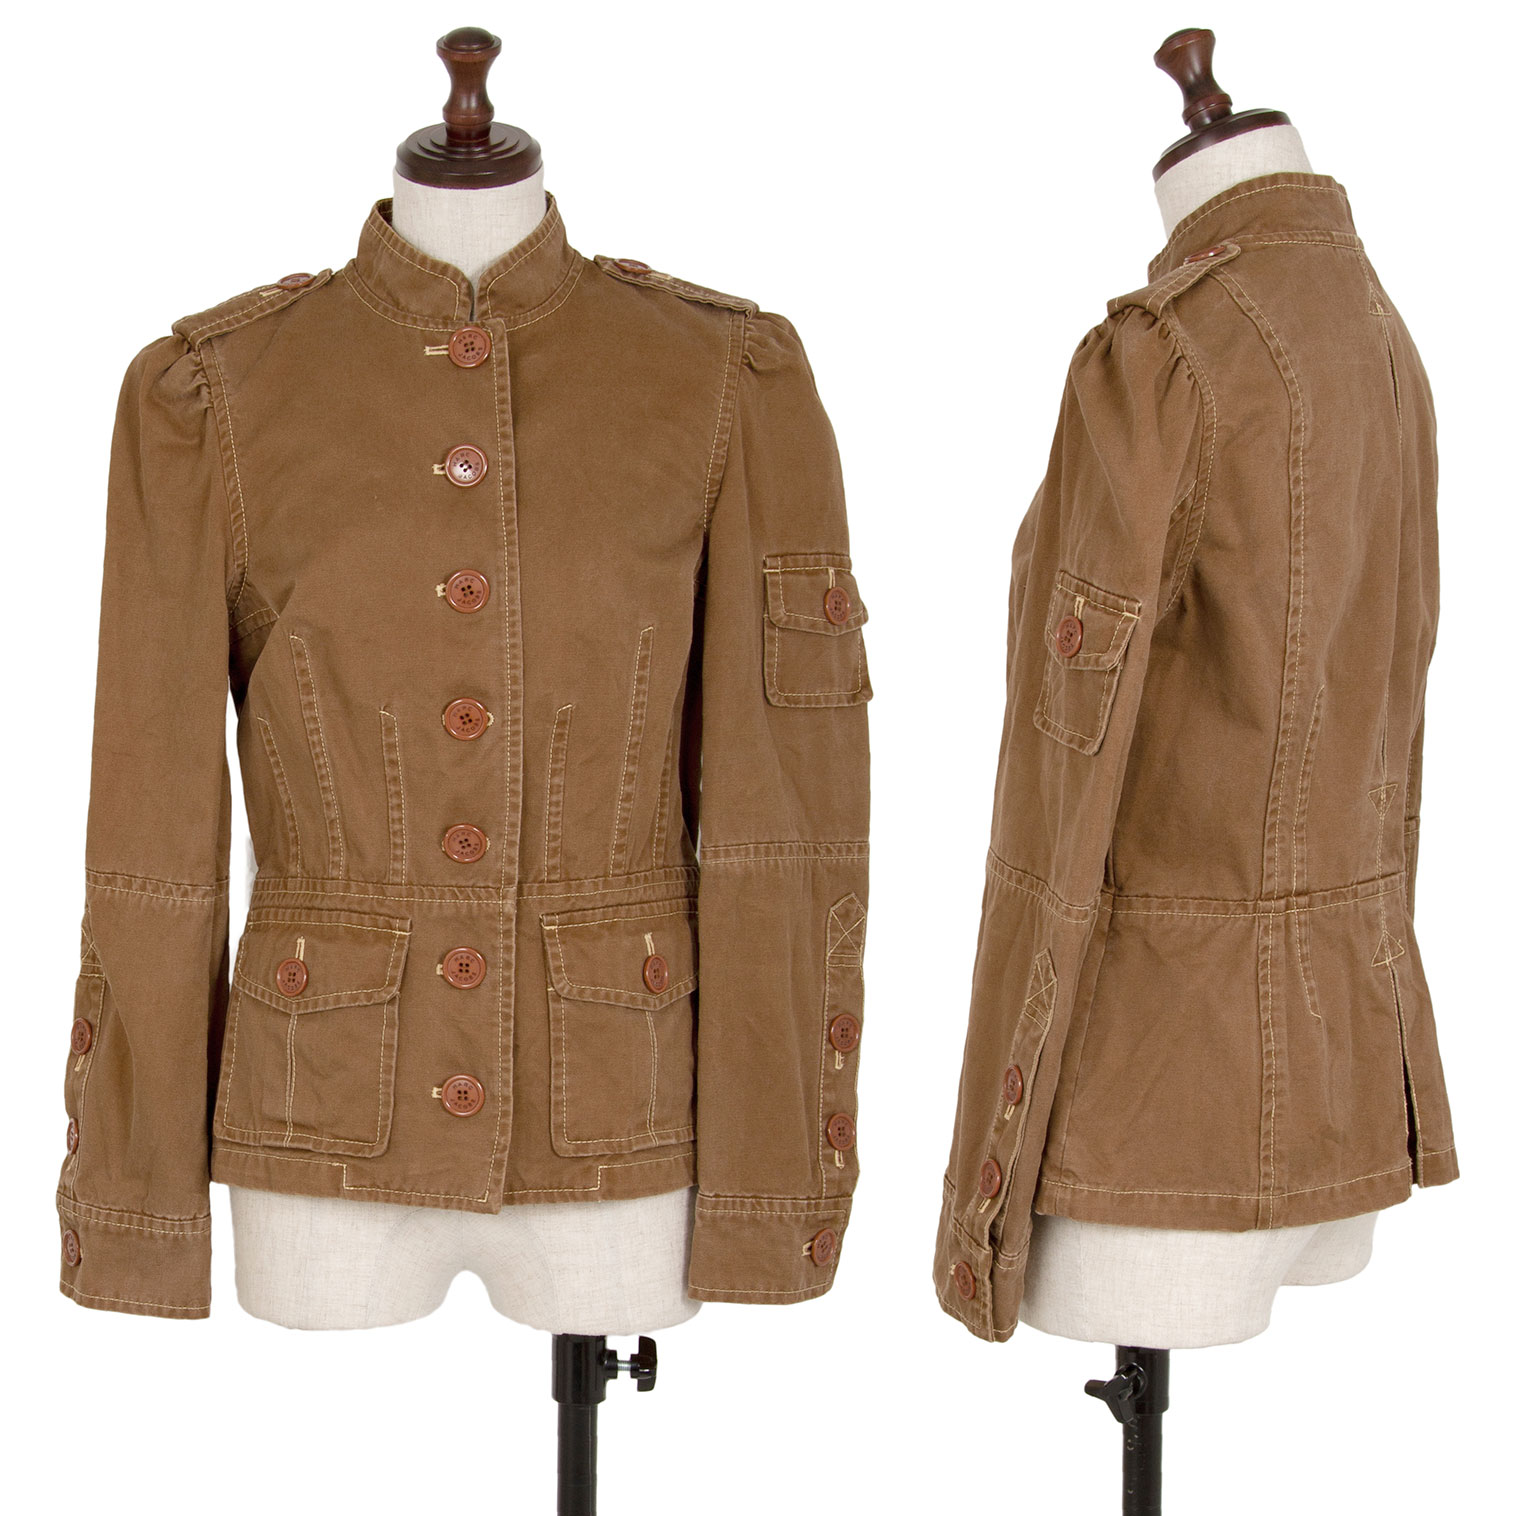 MARC BY MARC JACOBS military jacket